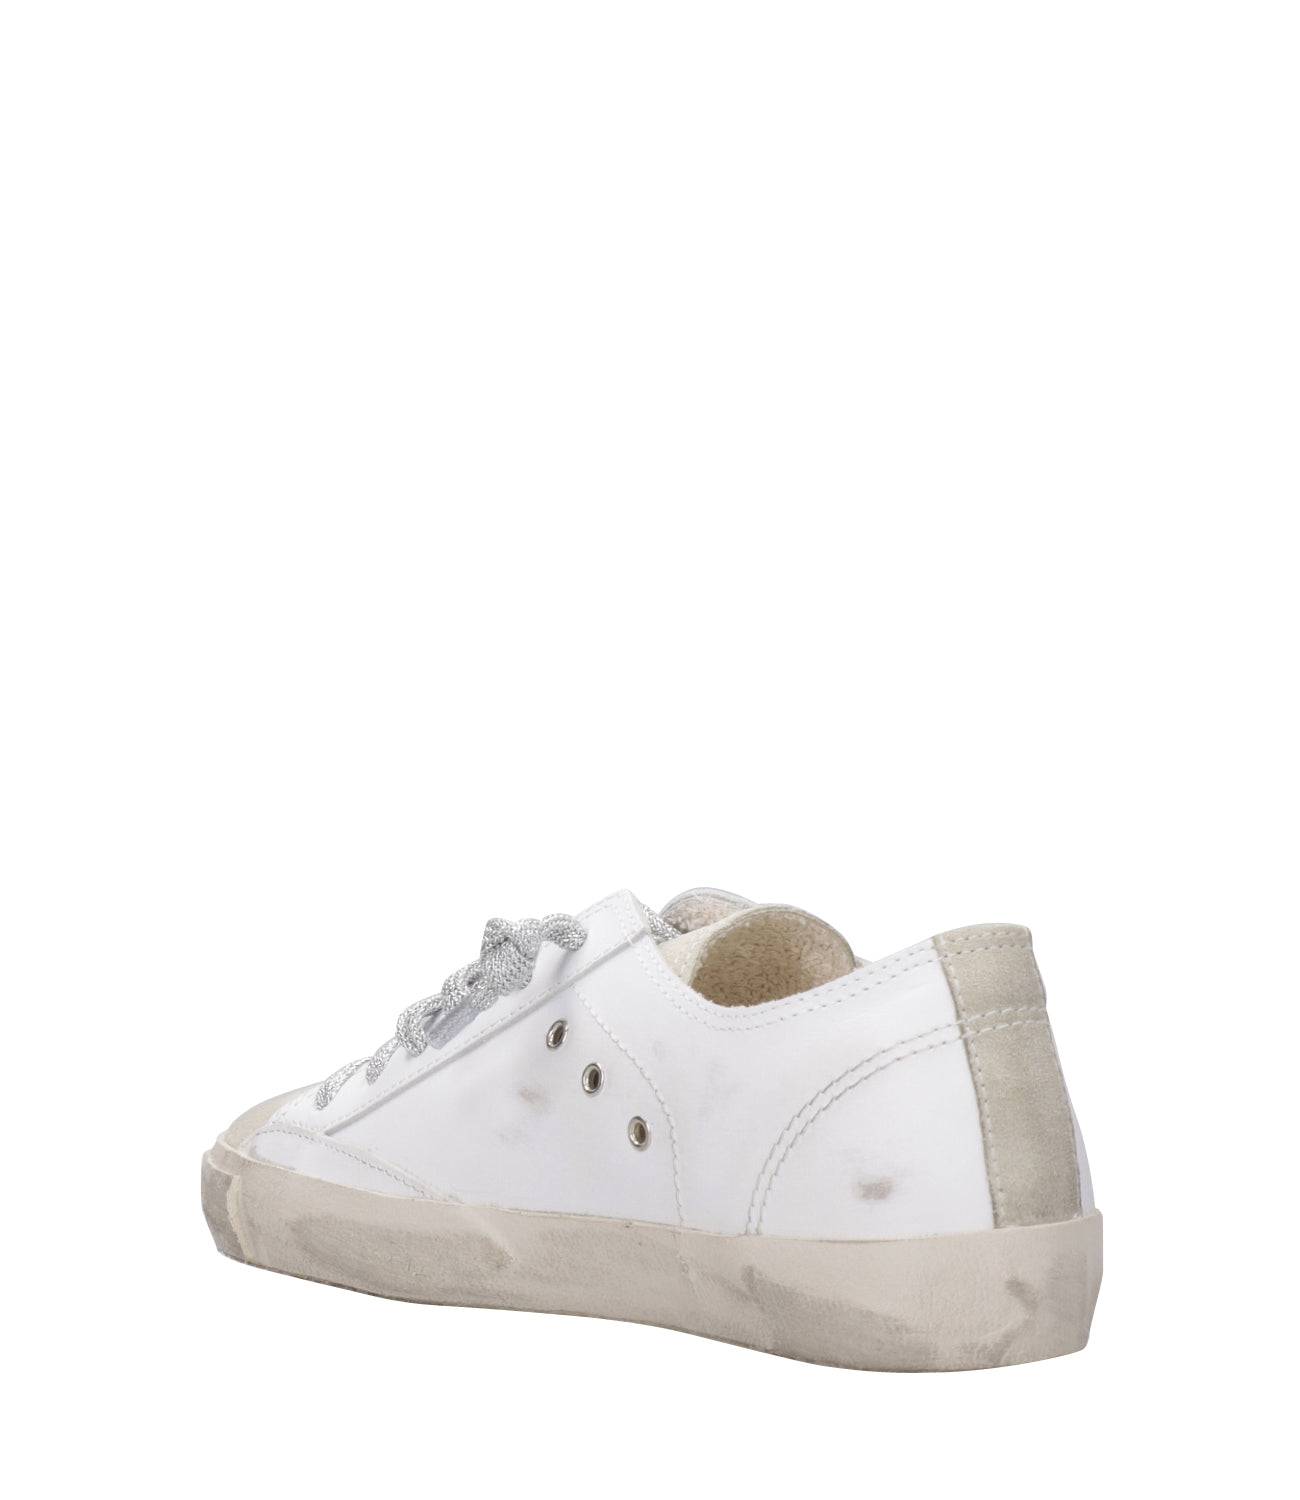 Philippe Model | PRSX Low White and Pink Sneakers